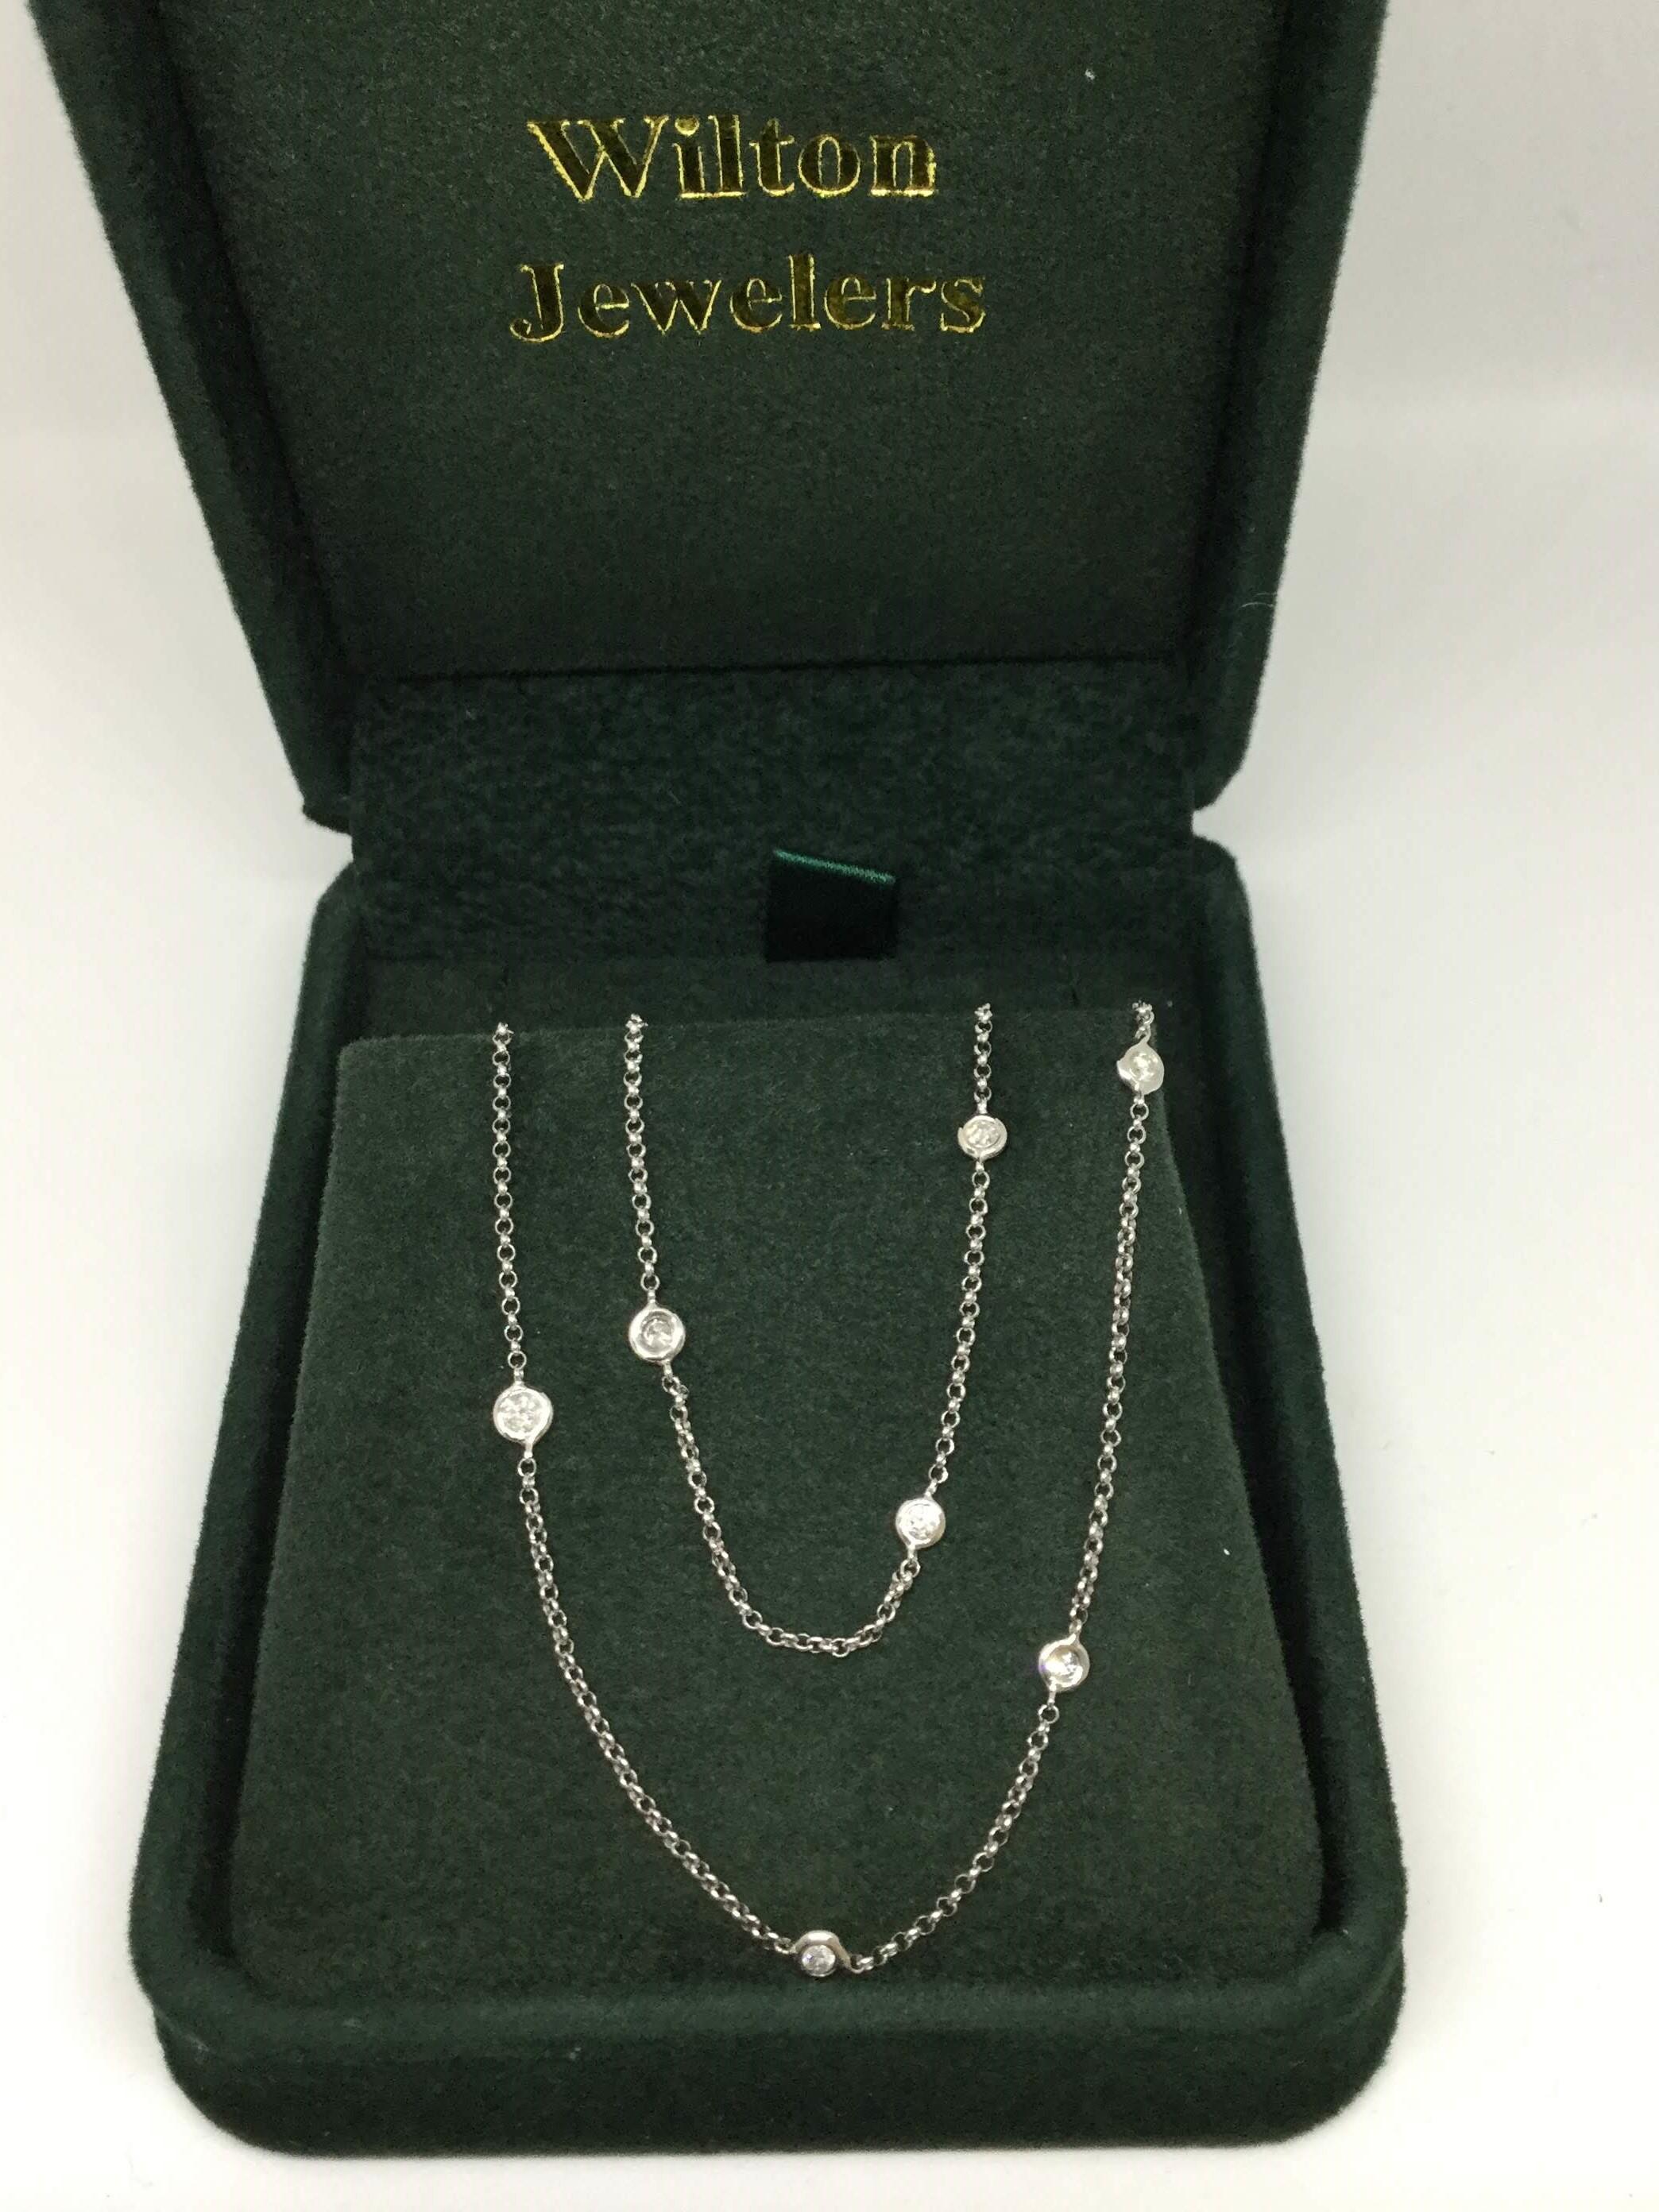 18K White gold diamond by the yard style necklace. The necklace contains 12 round brilliant cut diamonds that are bezel set. The necklace is 16 inches with a 2 inch extension.